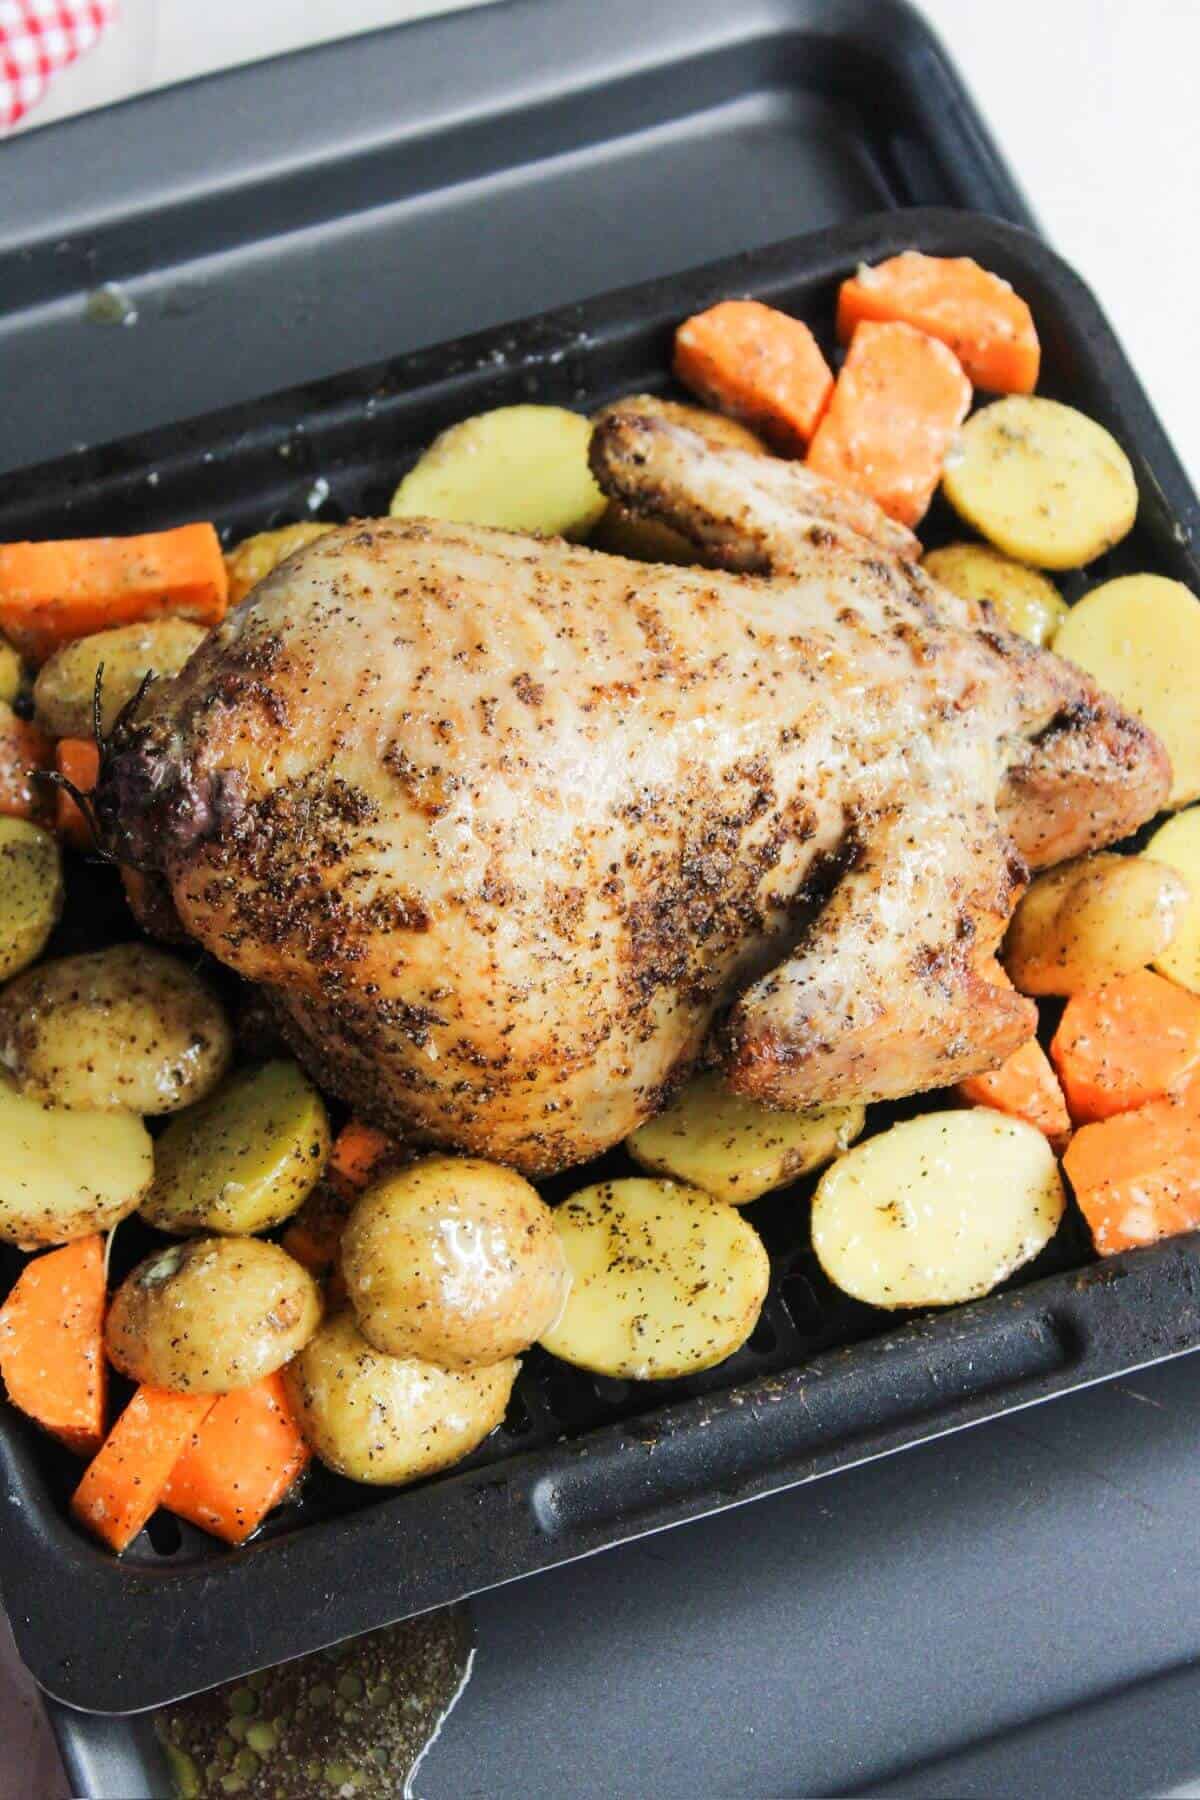 A whole chicken in the air fryer, roasted with carrots and potatoes on an air fryer tray.